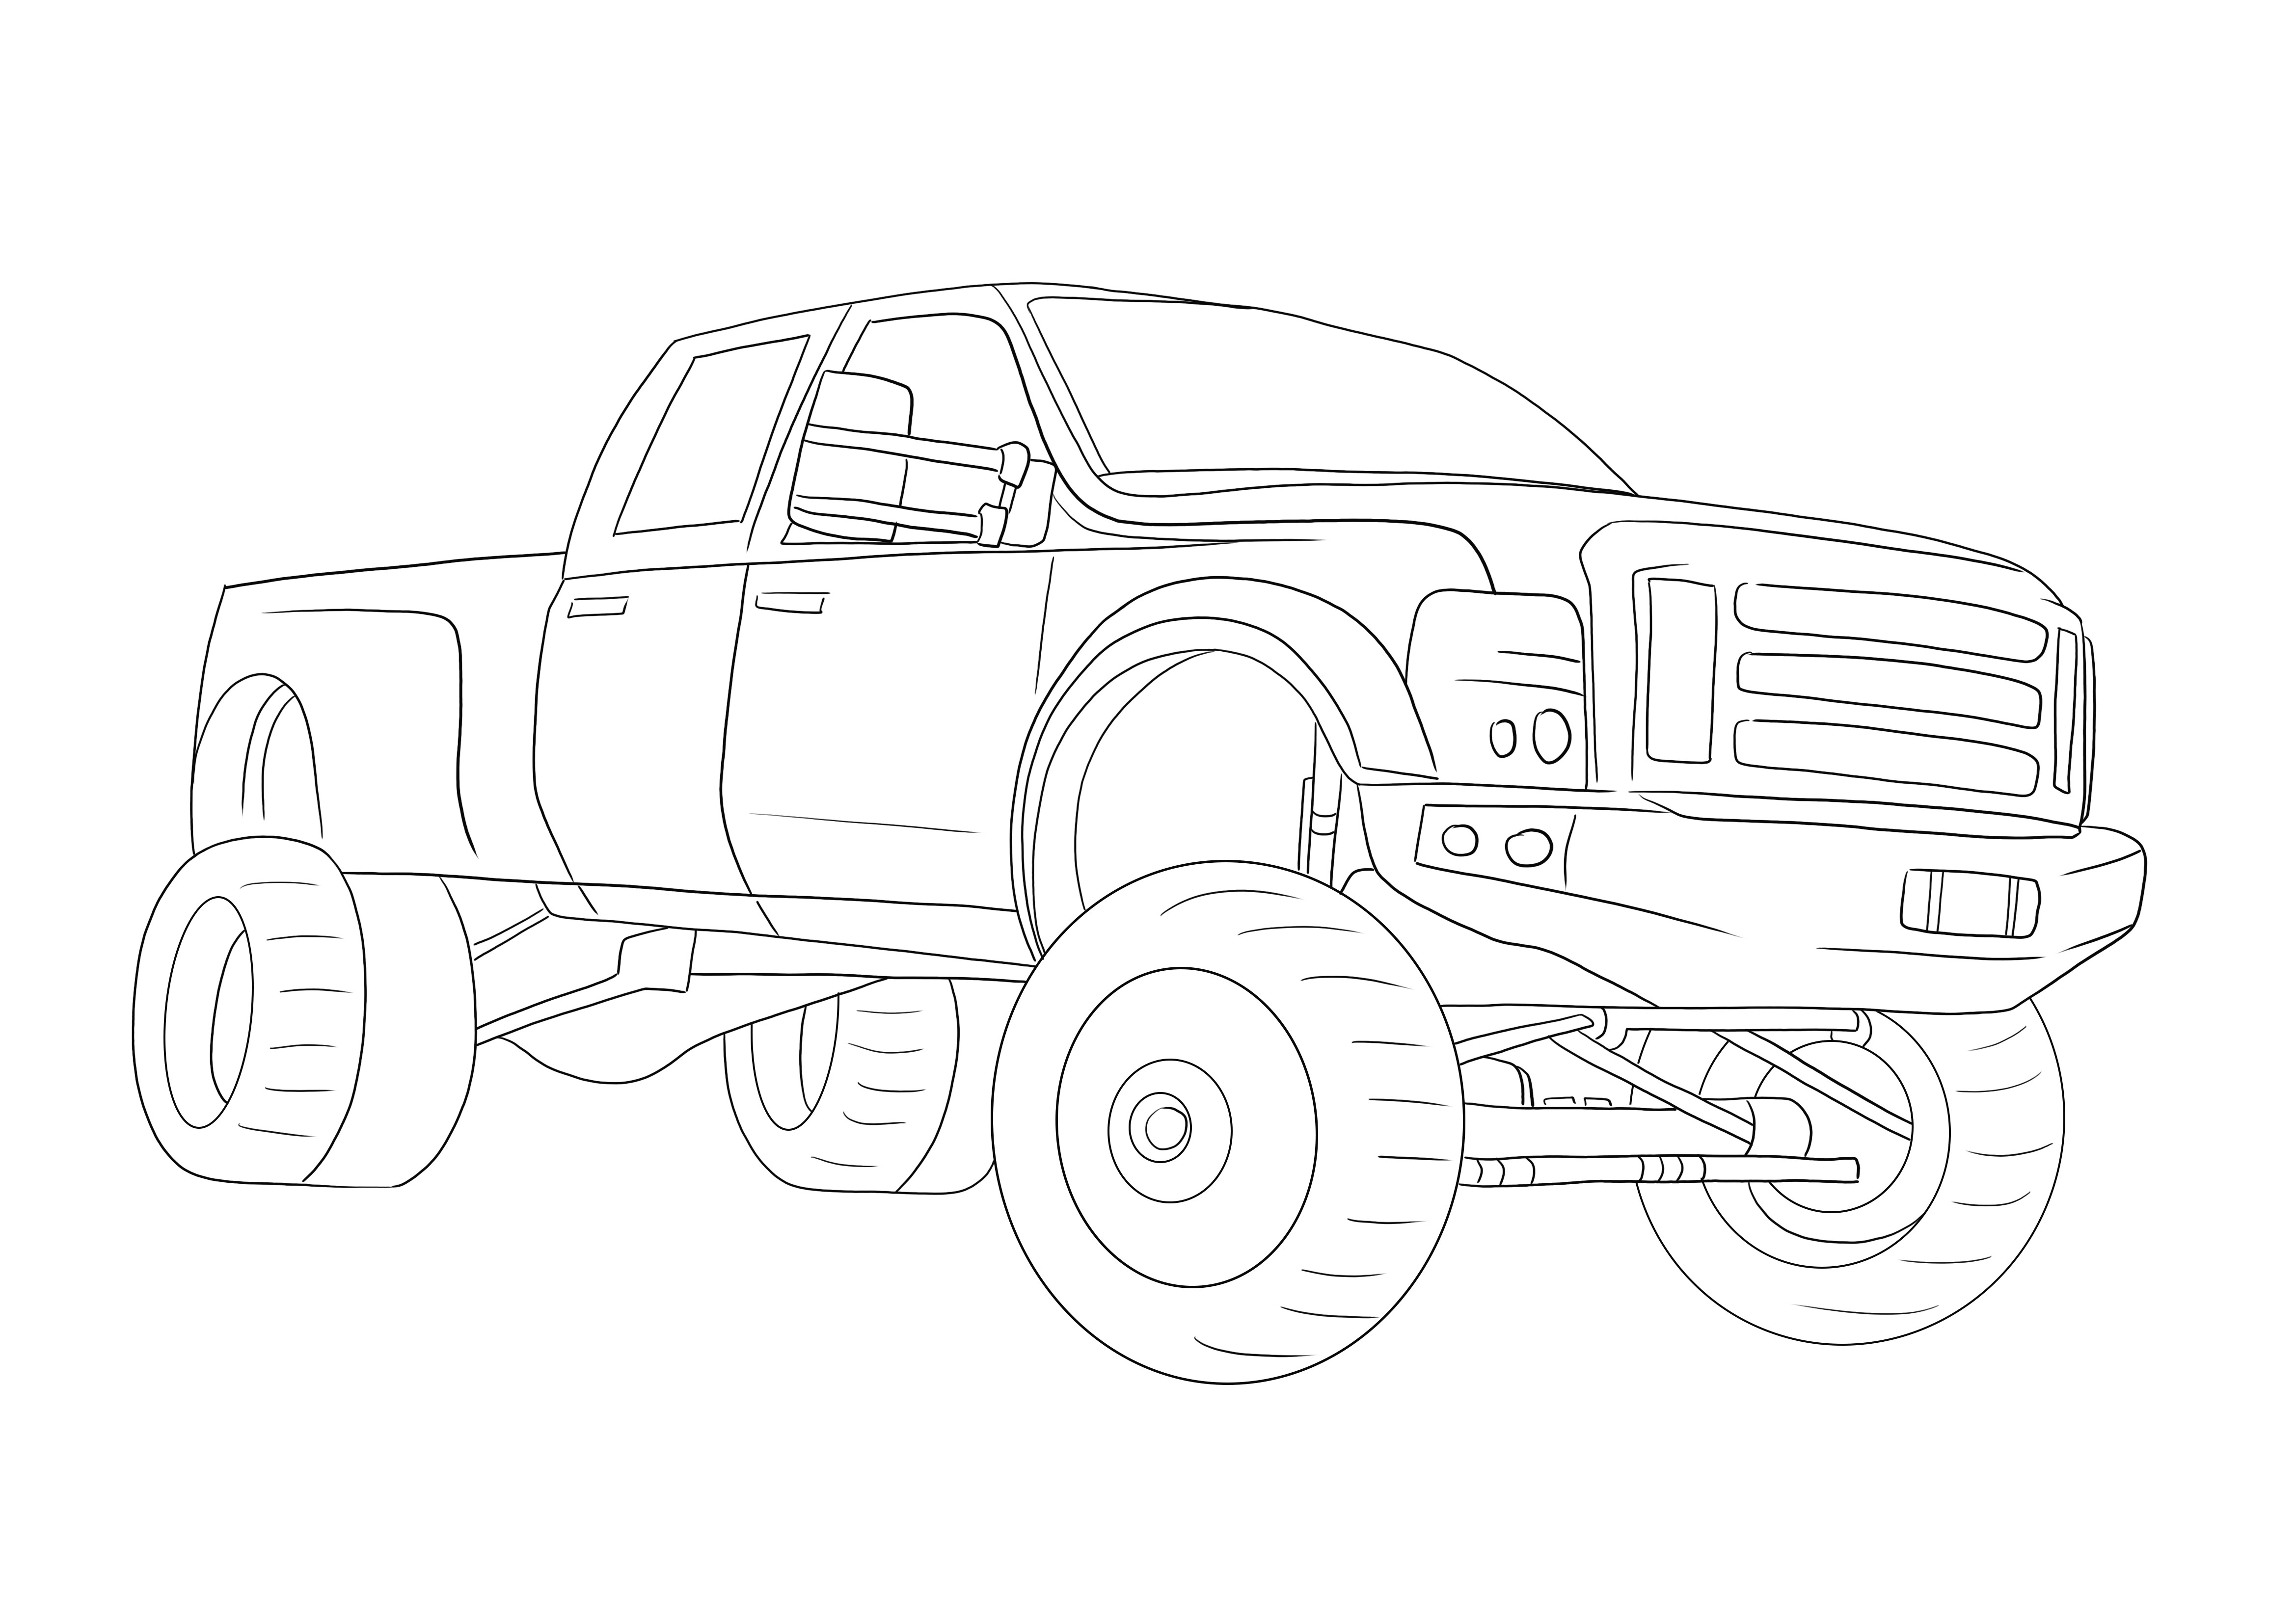 Free to print and color a Monster Energy Monster Truck for kids